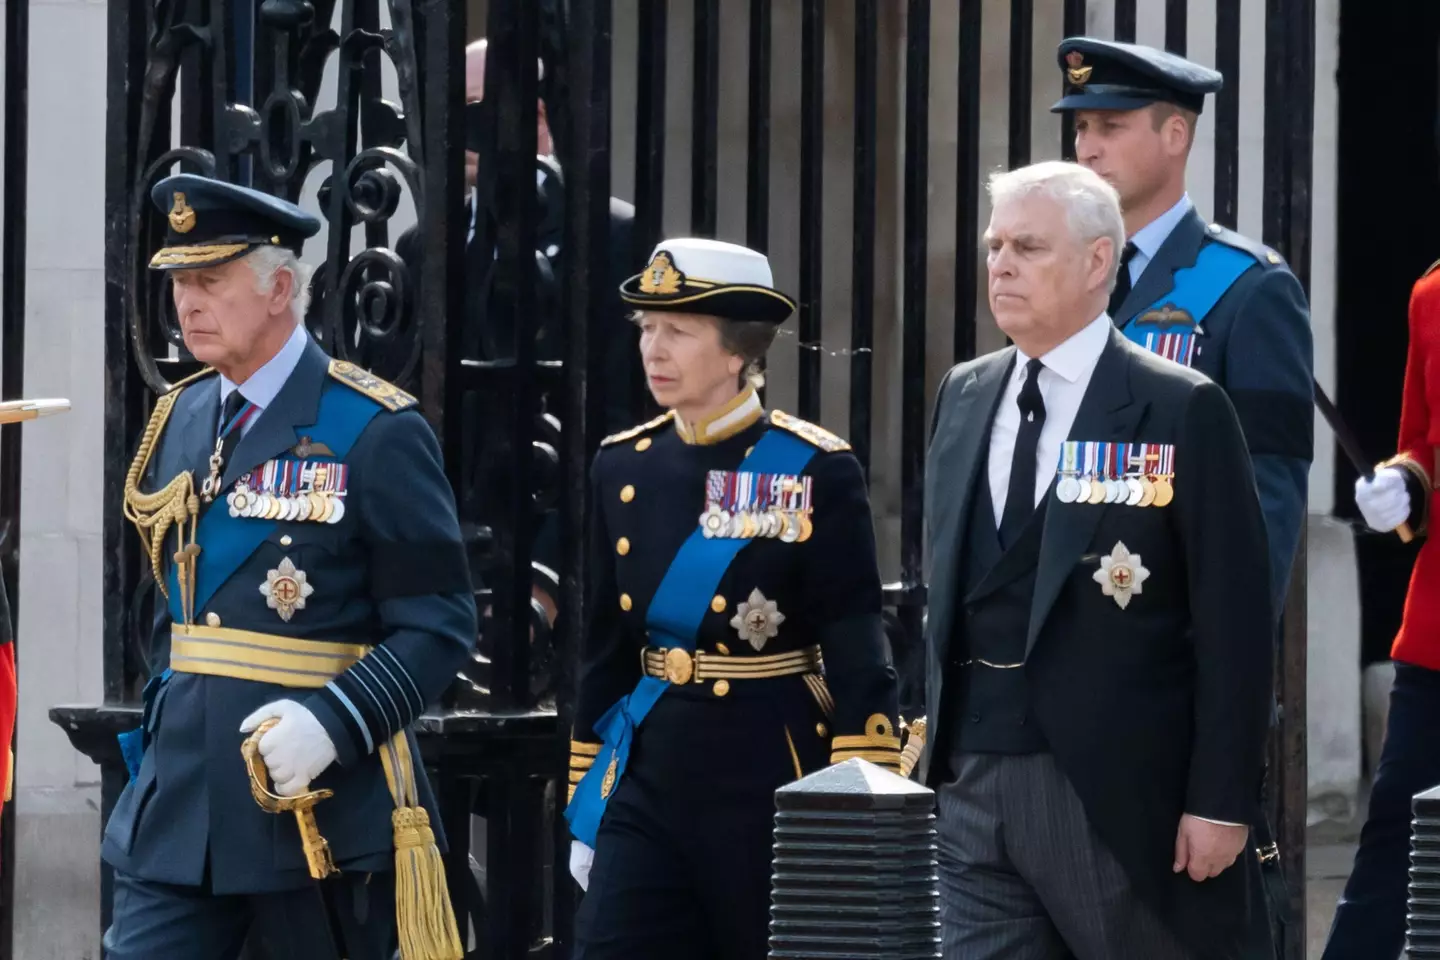 Prince Andrew has been appointed counsellor of state, while Princess Anne has not.